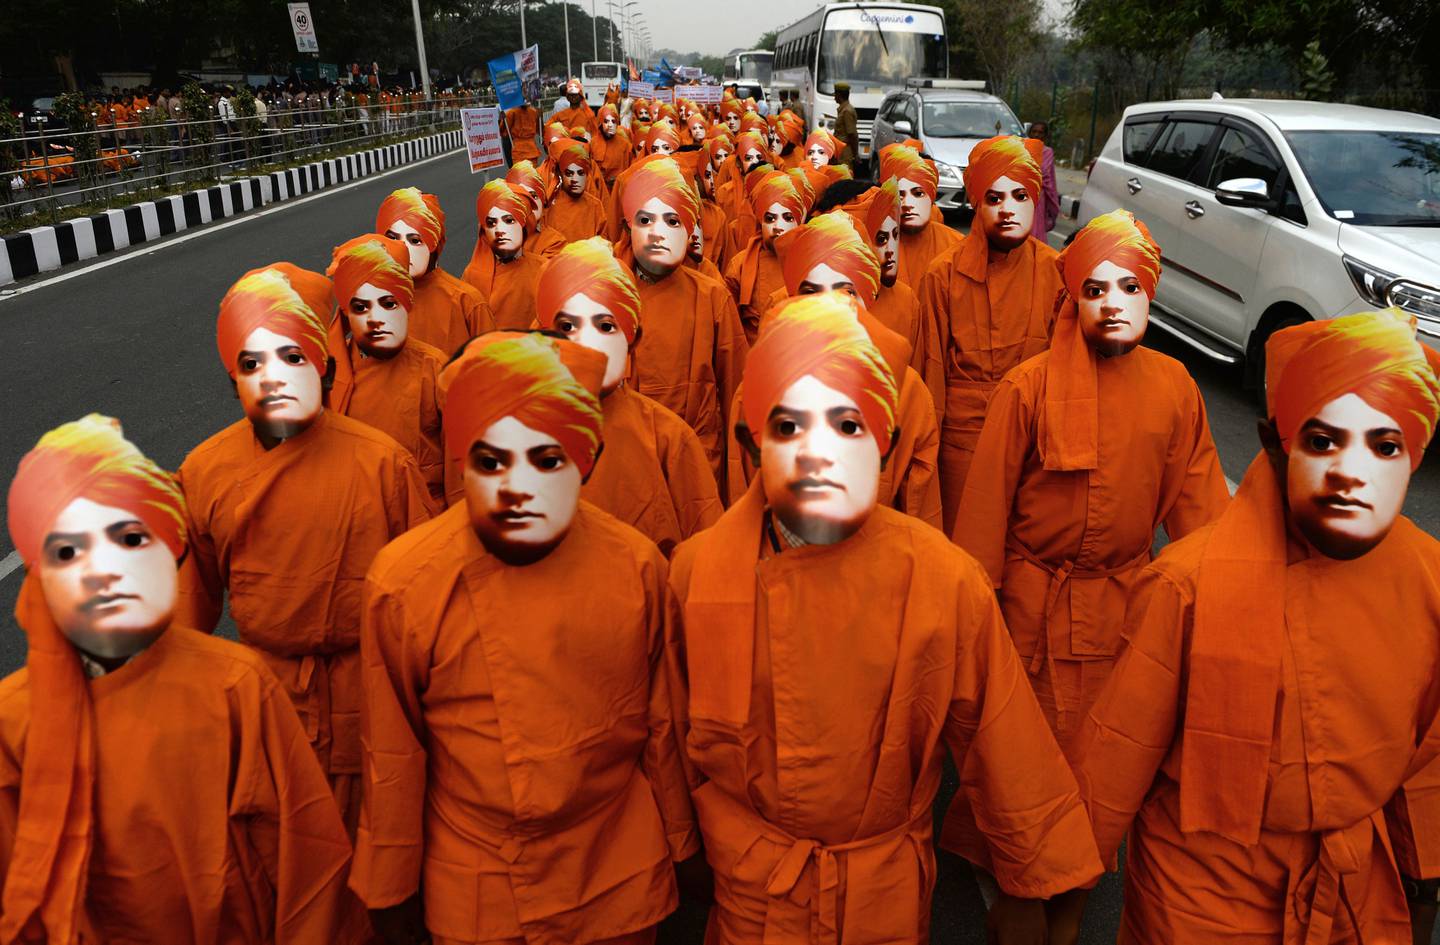 Indian students wear the face masks and attire of Indian scholar monk Swami Vivekananda at a rally on ocassion to mark his birth anniversary in Chennai on January  20, 2018.
Vivekananda is considered a major force in the revival of Hinduism in modern India. / AFP PHOTO / ARUN SANKAR